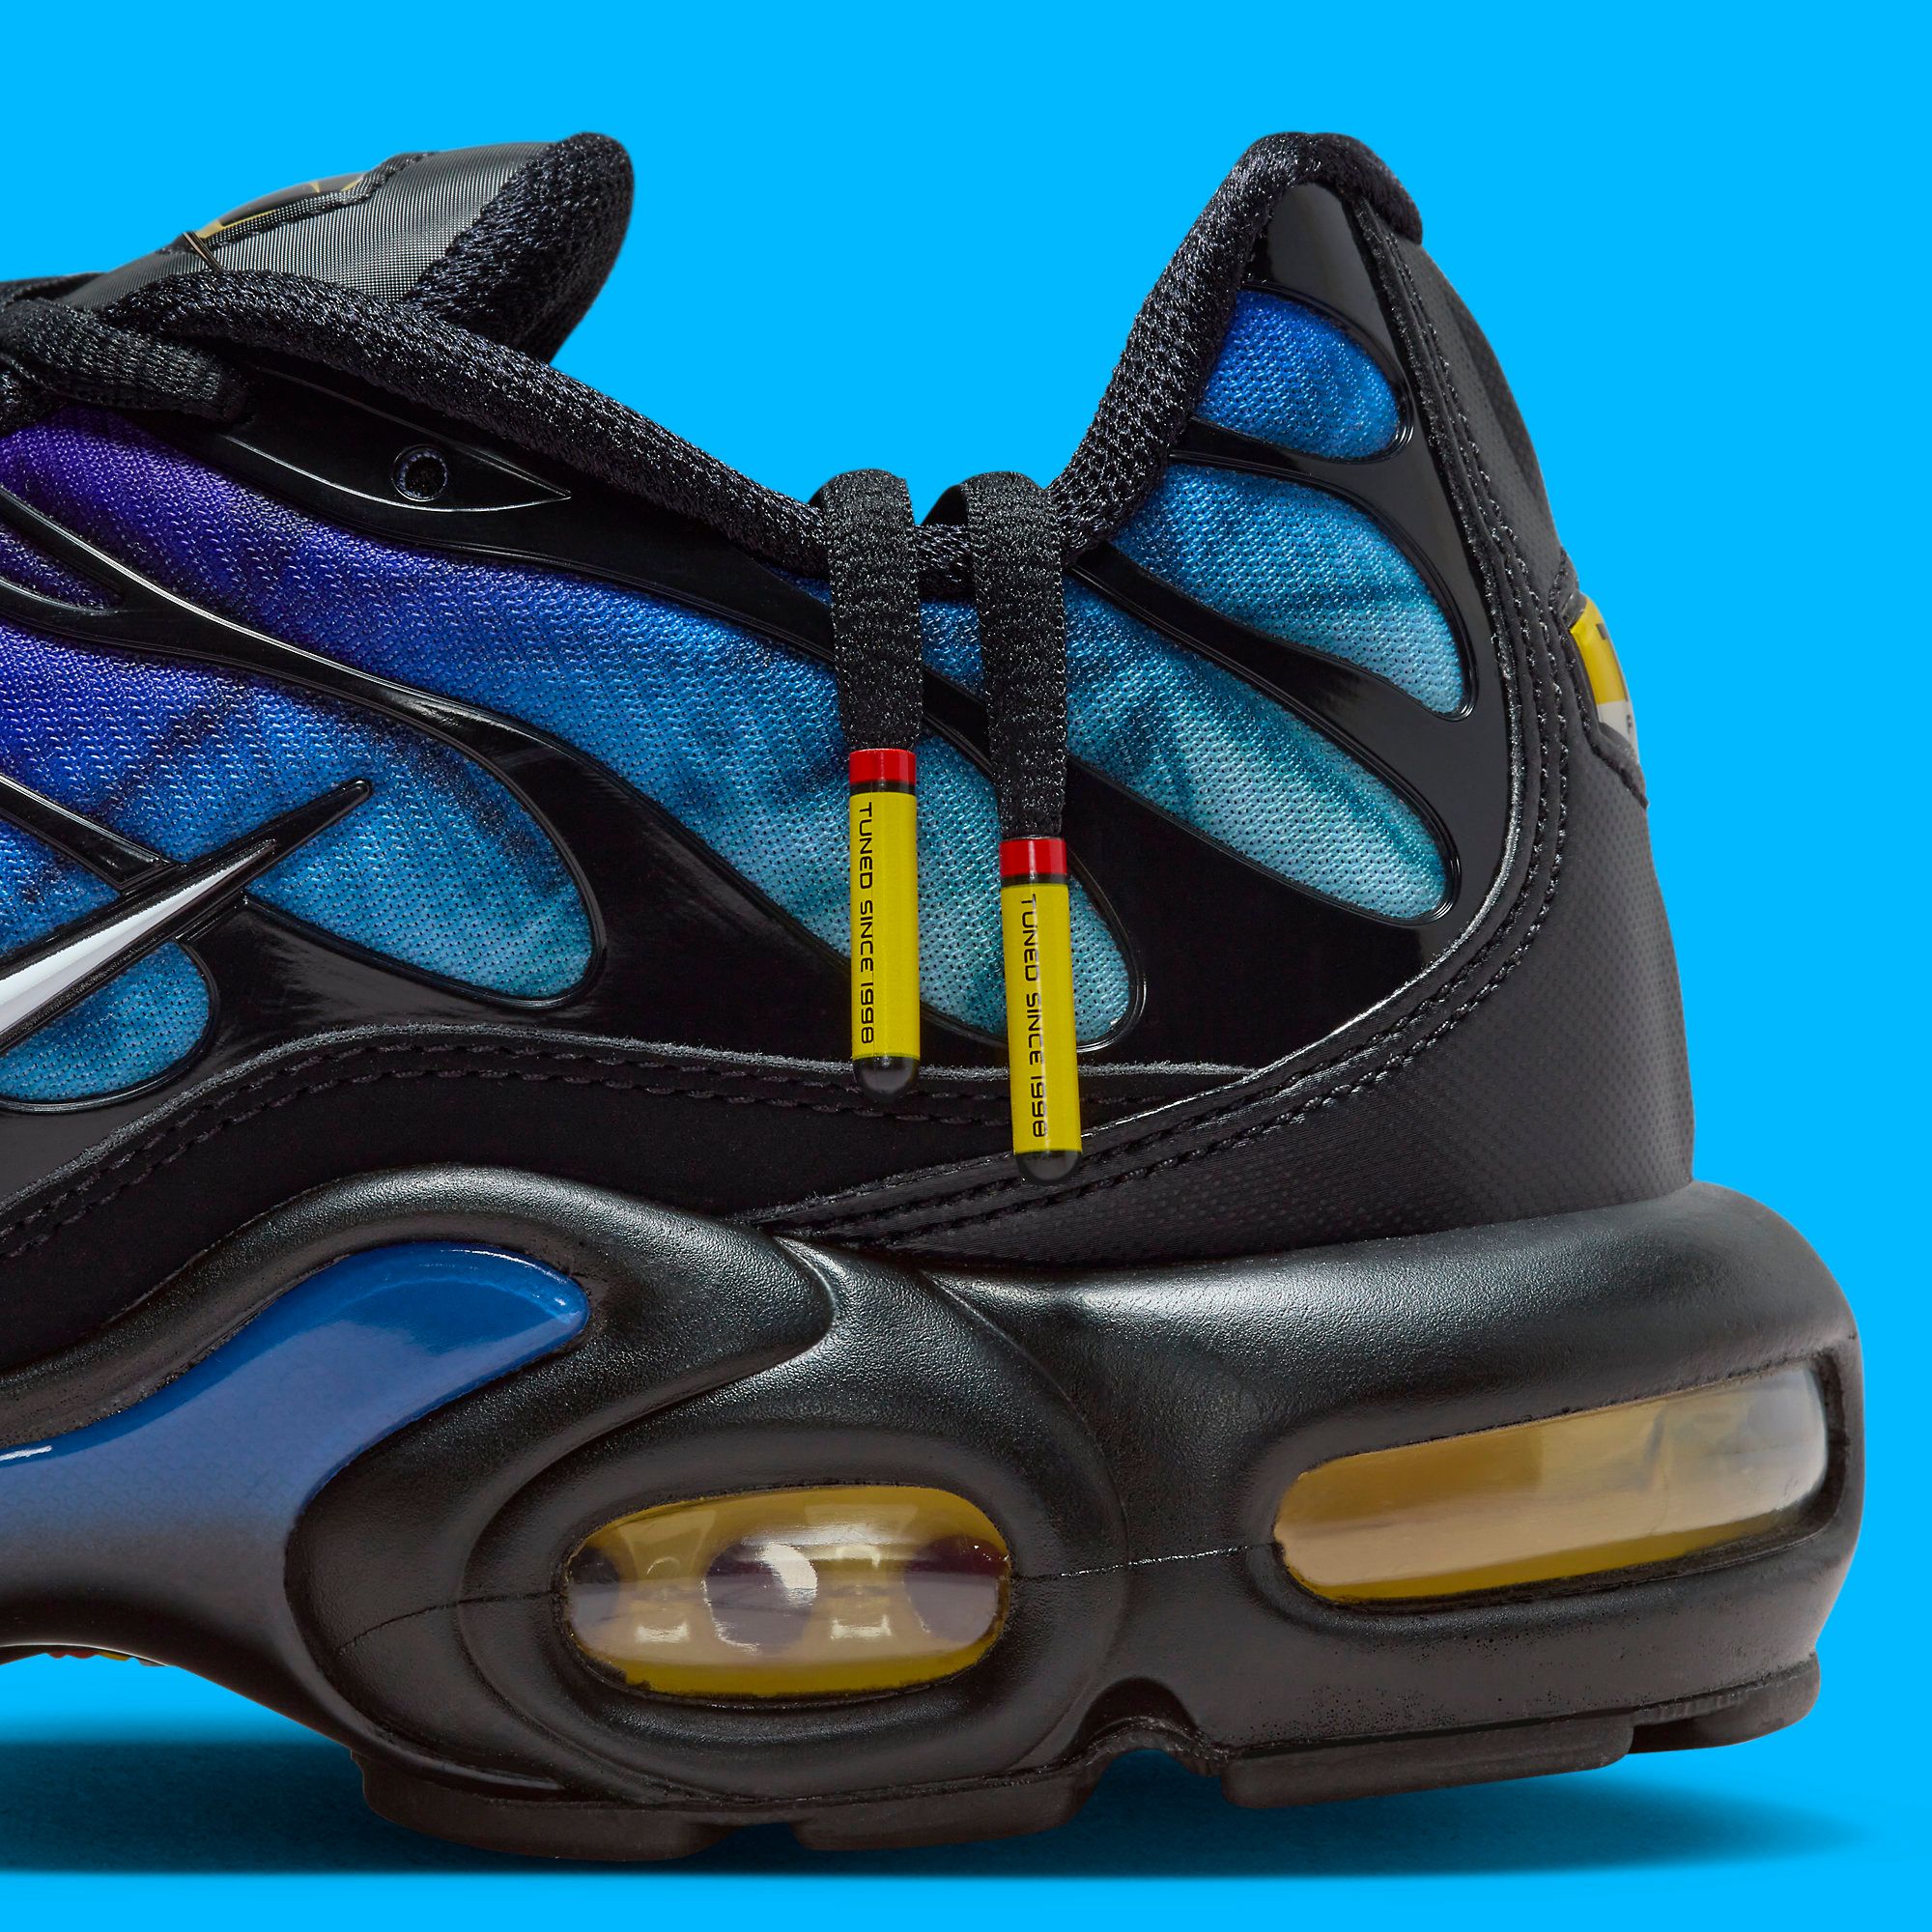 Nike Celebrate the Air Max Plus with 